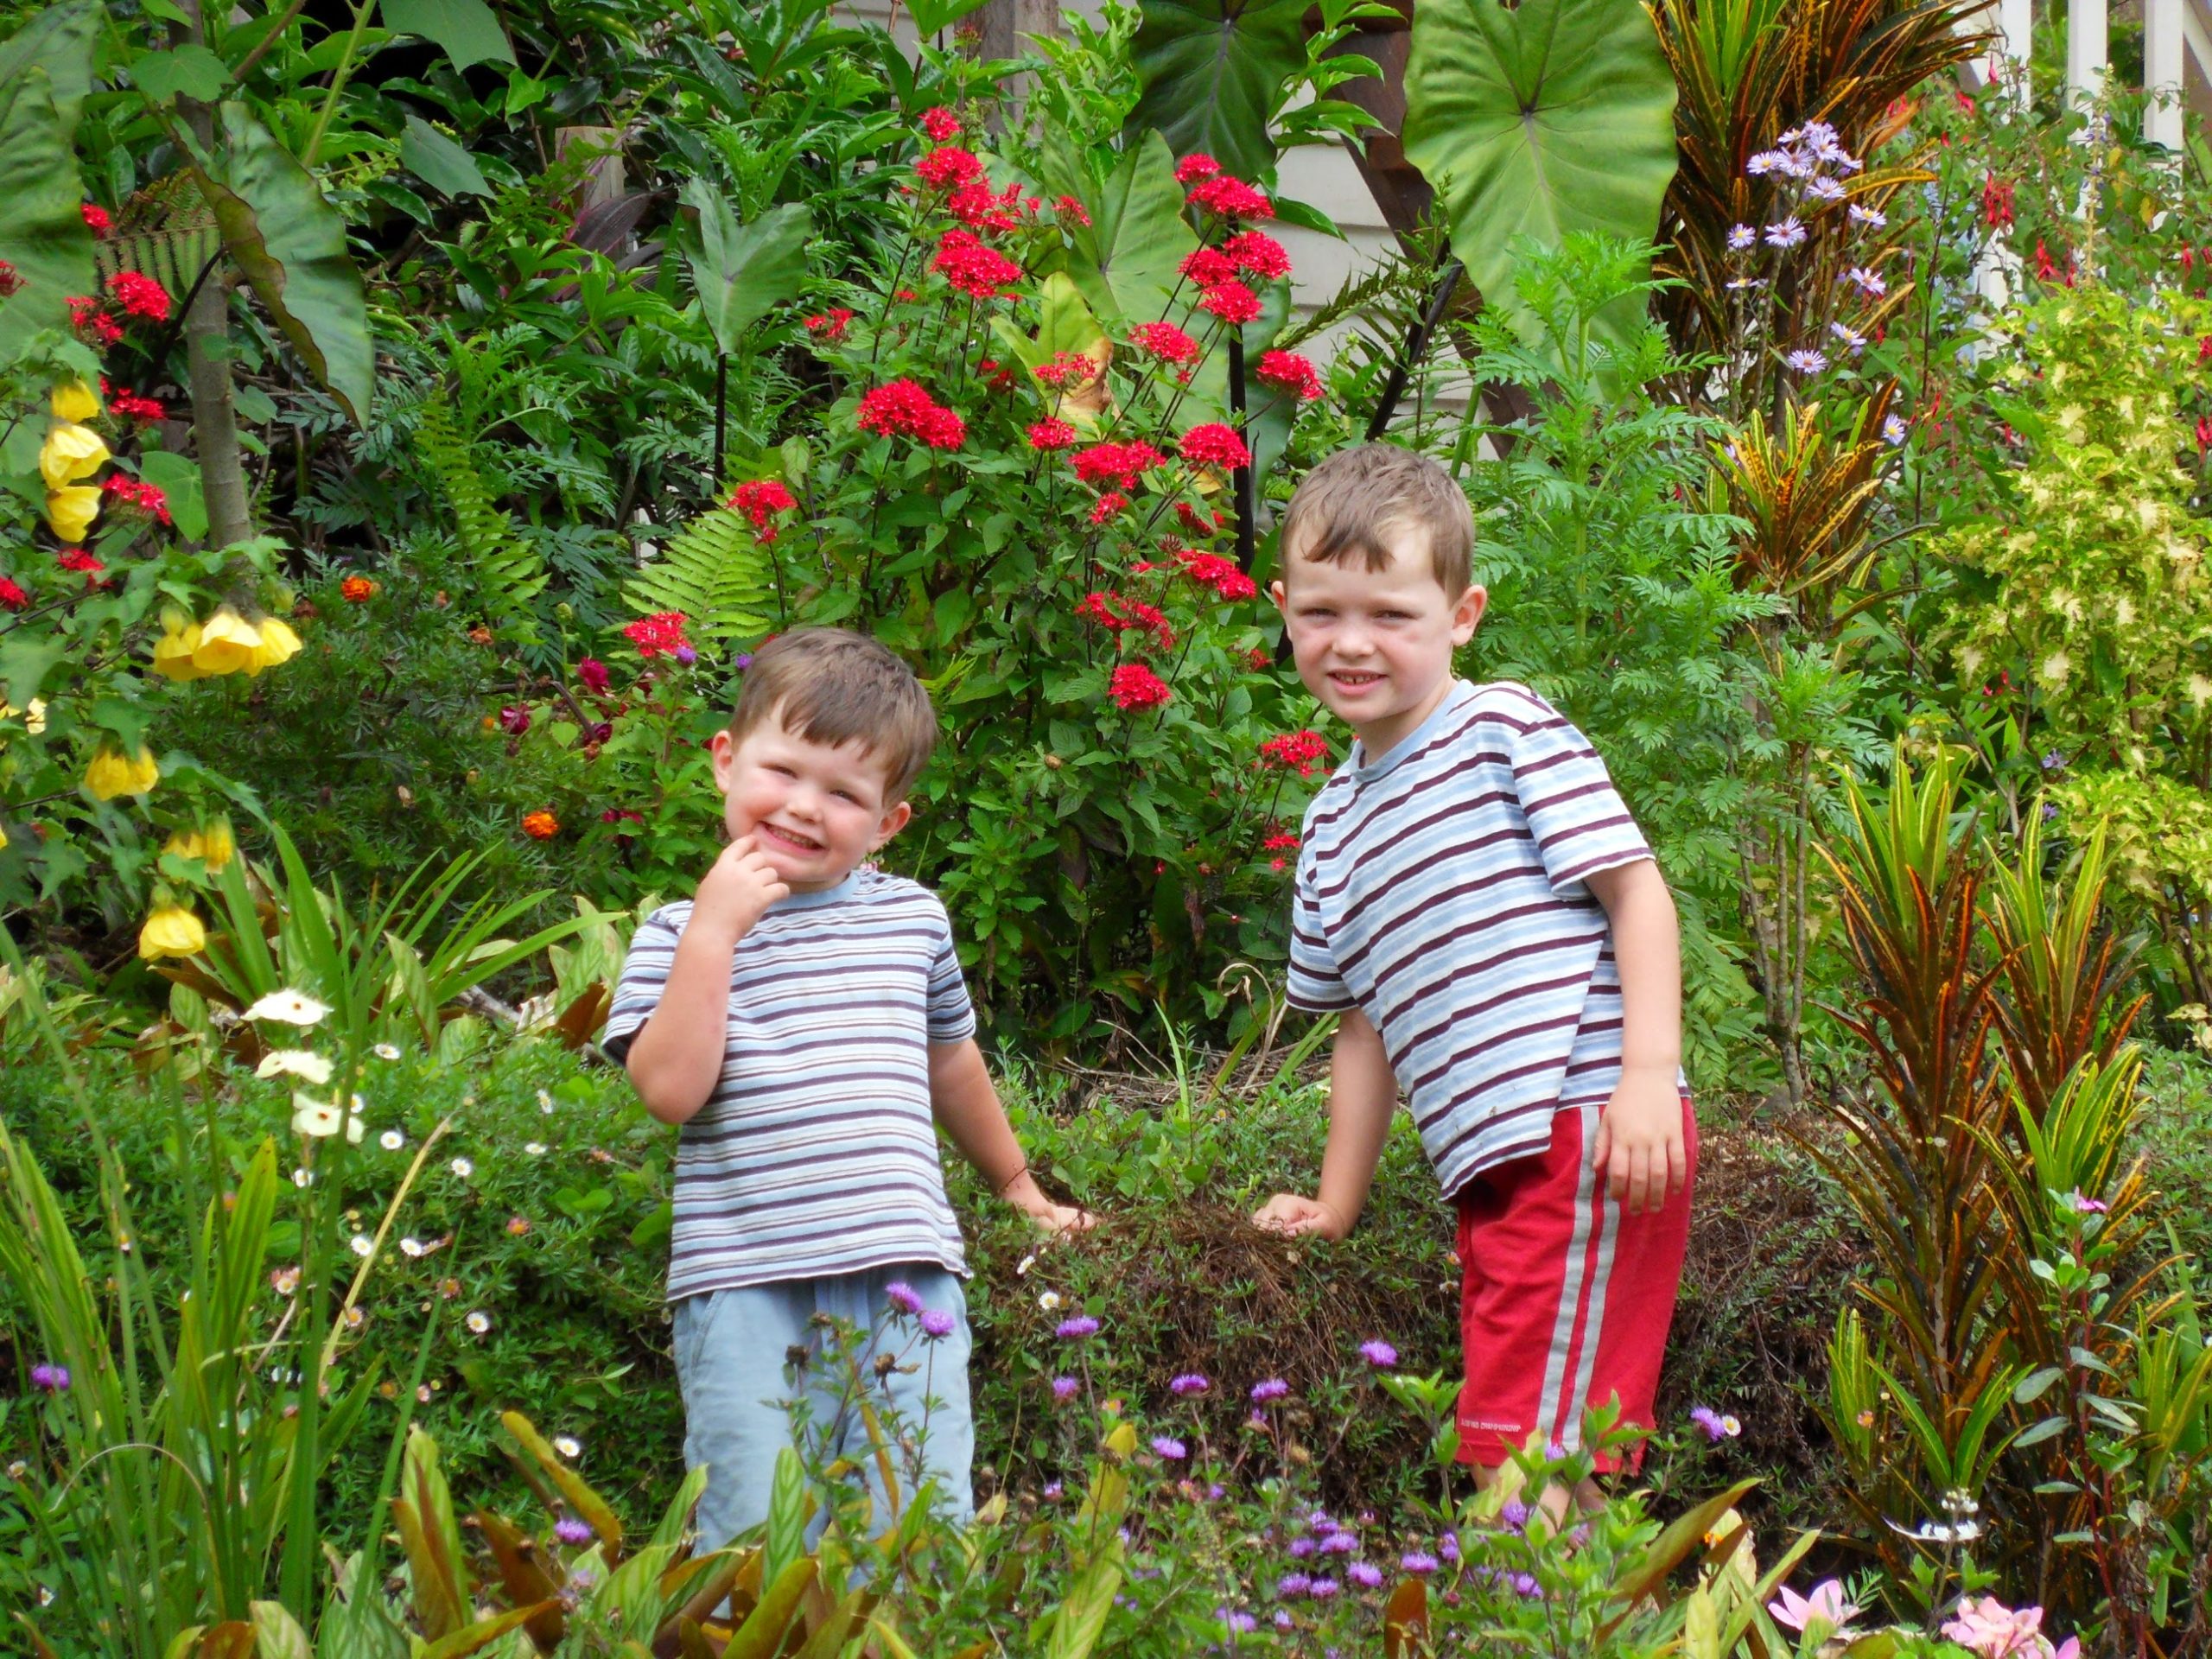 Joshua and his brother in a garden, surrounded by flowers and greenery